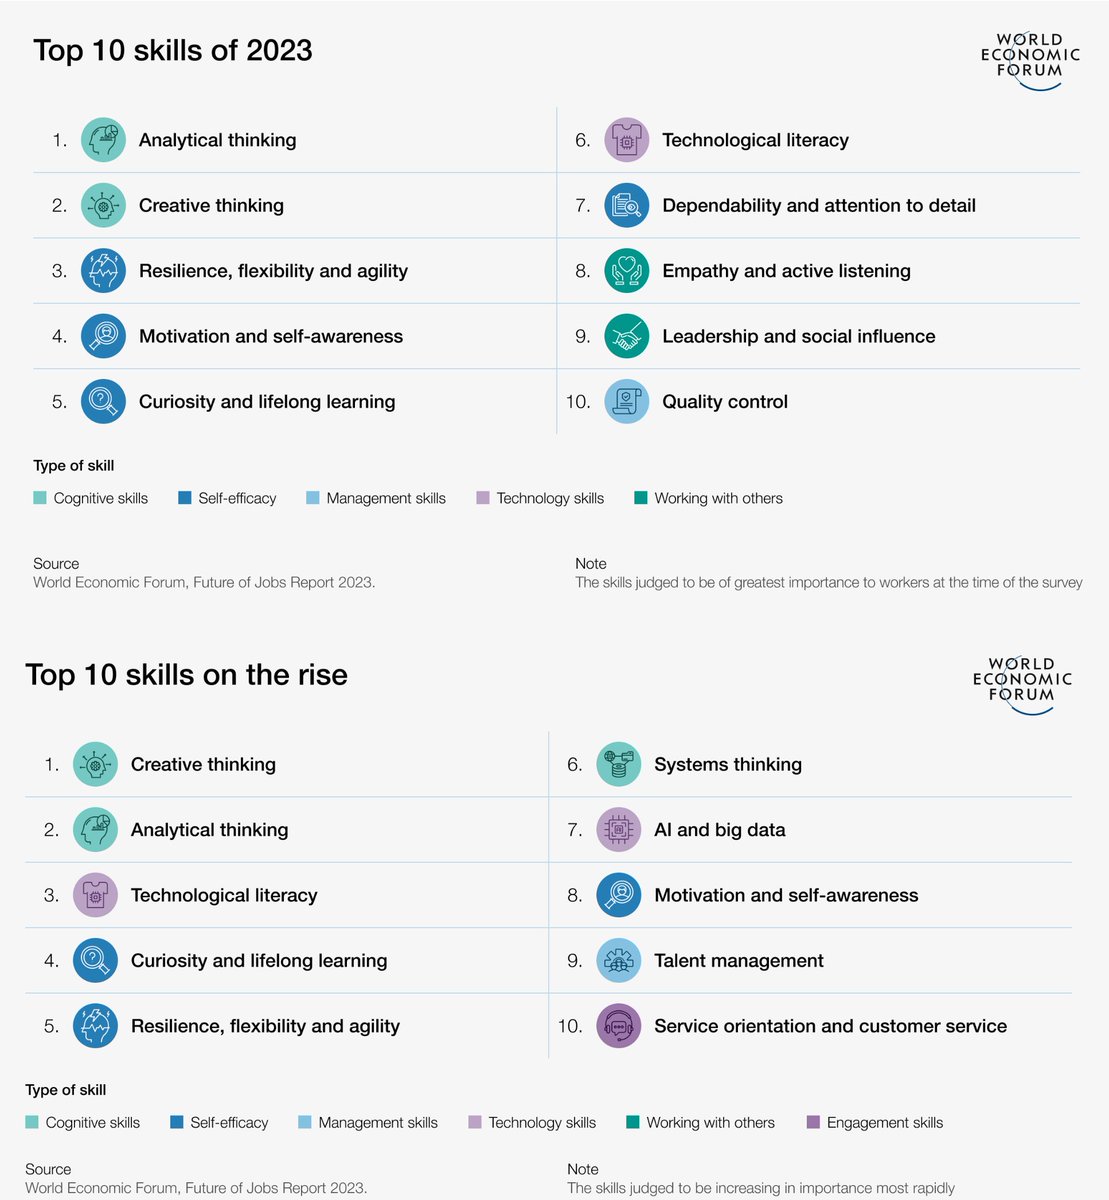 These 2023 findings from the World Economic Forum ought to make you think about WHAT you're teaching ... and maybe focus on HOW you're teaching it to build these skills? #ItsWhatWeDo @IDECorp @wef